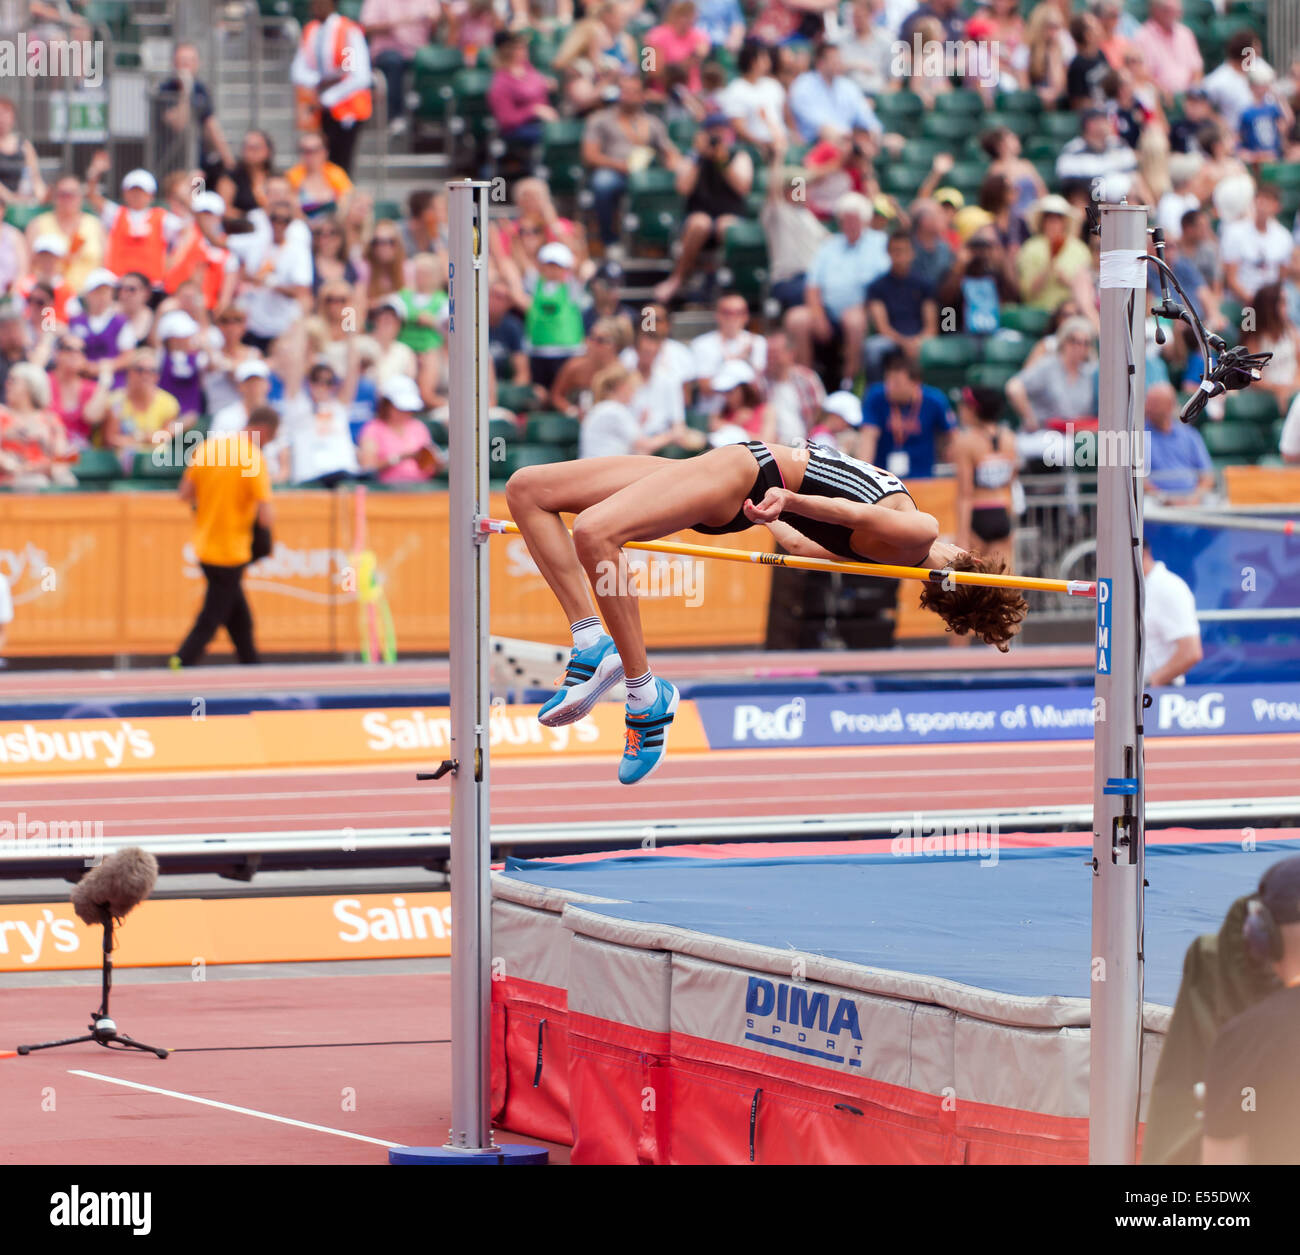 Blanka Vlasic clearing  the High Jump bar at the Sainsbury's Anniversary Games, Horse Guards Parade Siunday 20th June 2014. Blanka went on to win the competition in a seasons best of 2 meters dead. Stock Photo